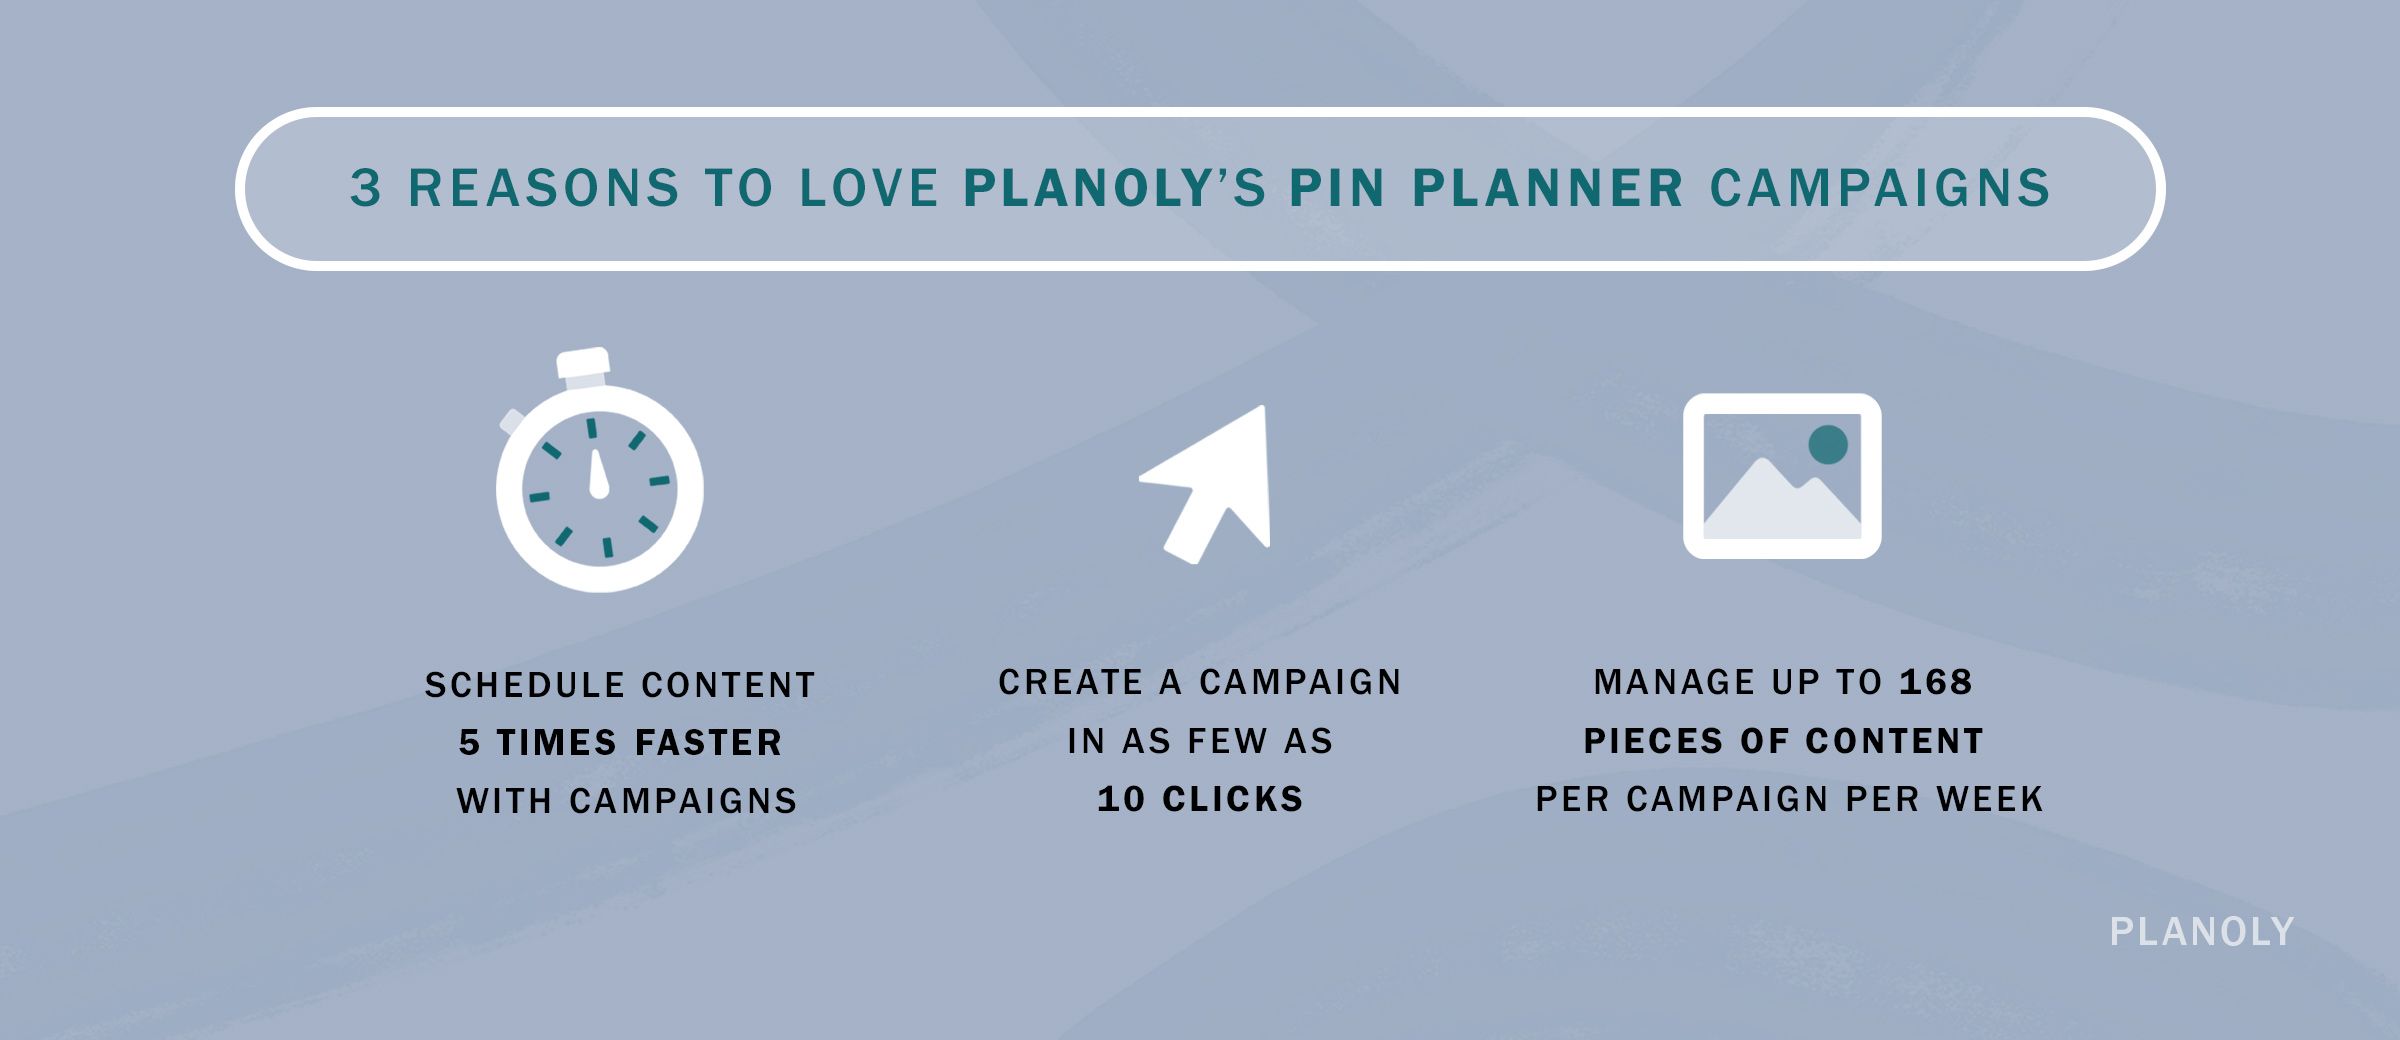 PLANOLY-Blog Post-Pin Planner Case Study-Img 1